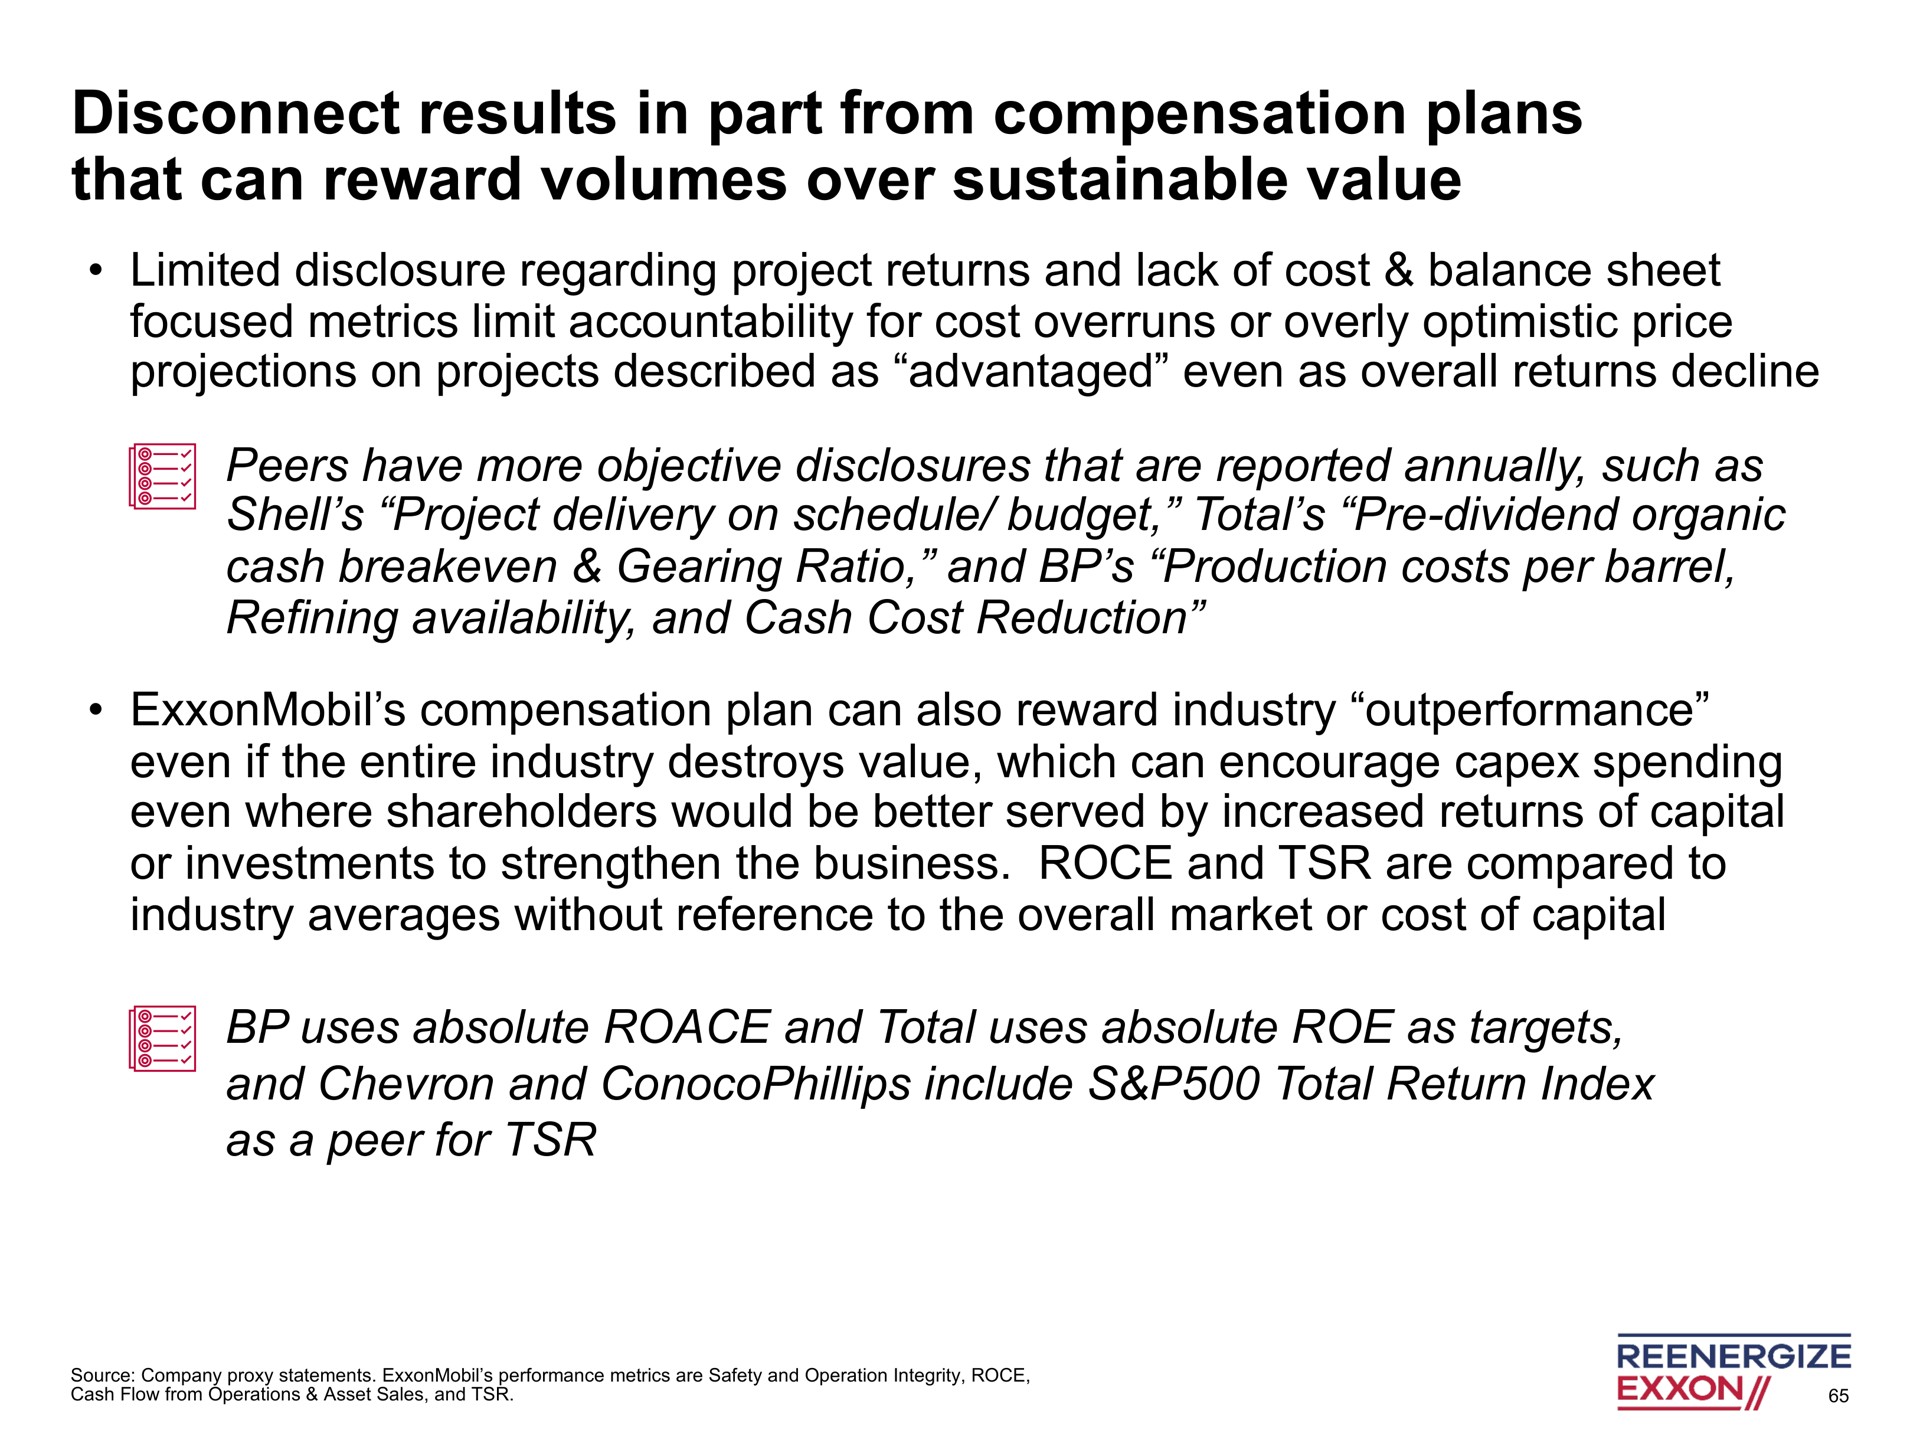 disconnect results in part from compensation plans that can reward volumes over sustainable value | Engine No. 1